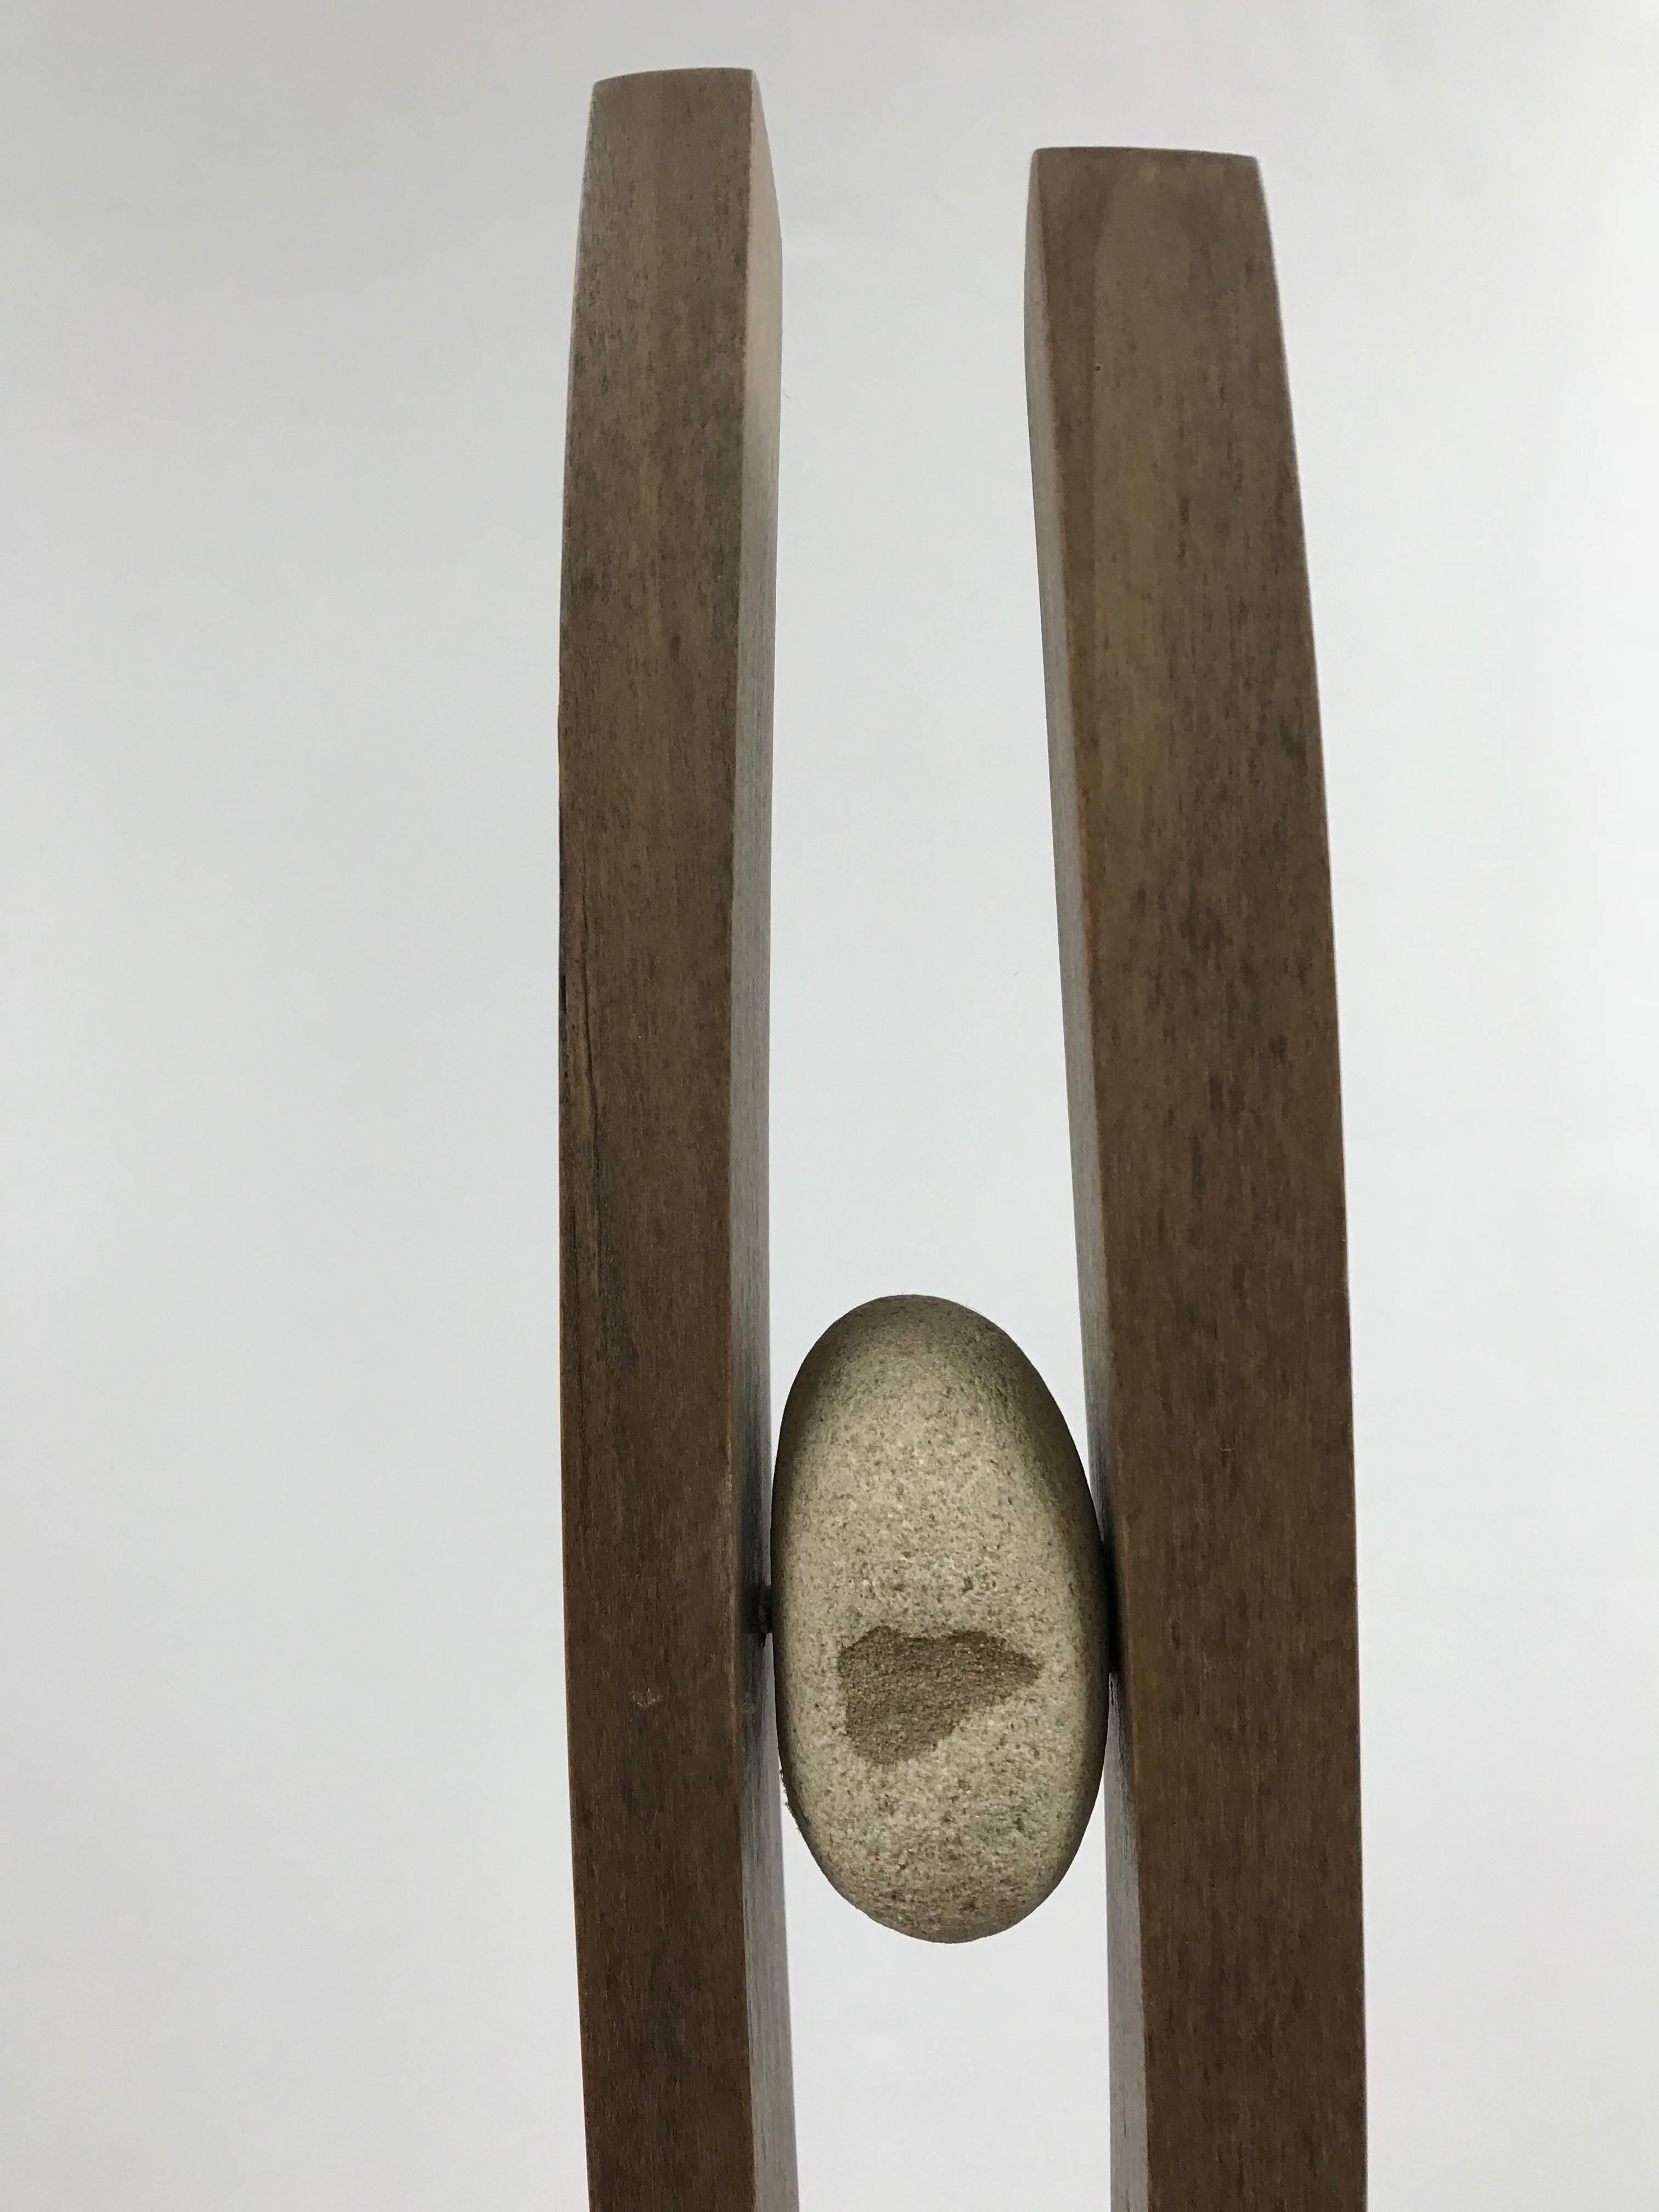 Gregory West, "Found Belonging", Wood and stone, 30in. x 6in. x 6in.

From the artist:
